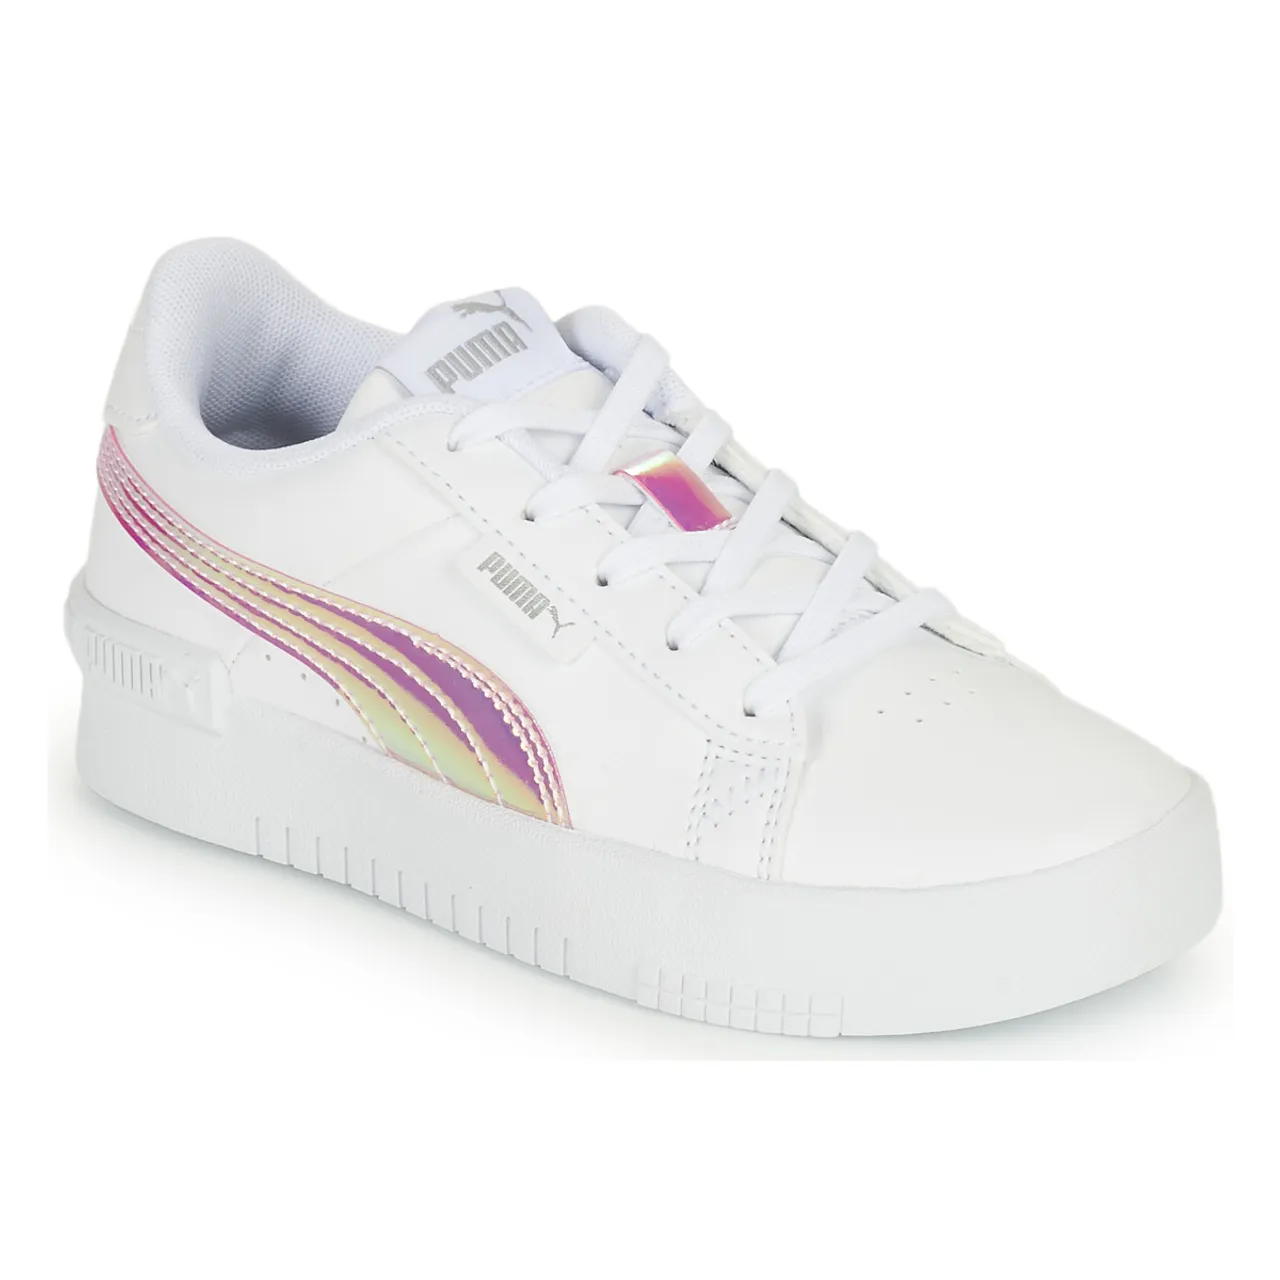 Puma  Jada Holo PS  girls's Children's Shoes (Trainers) in White